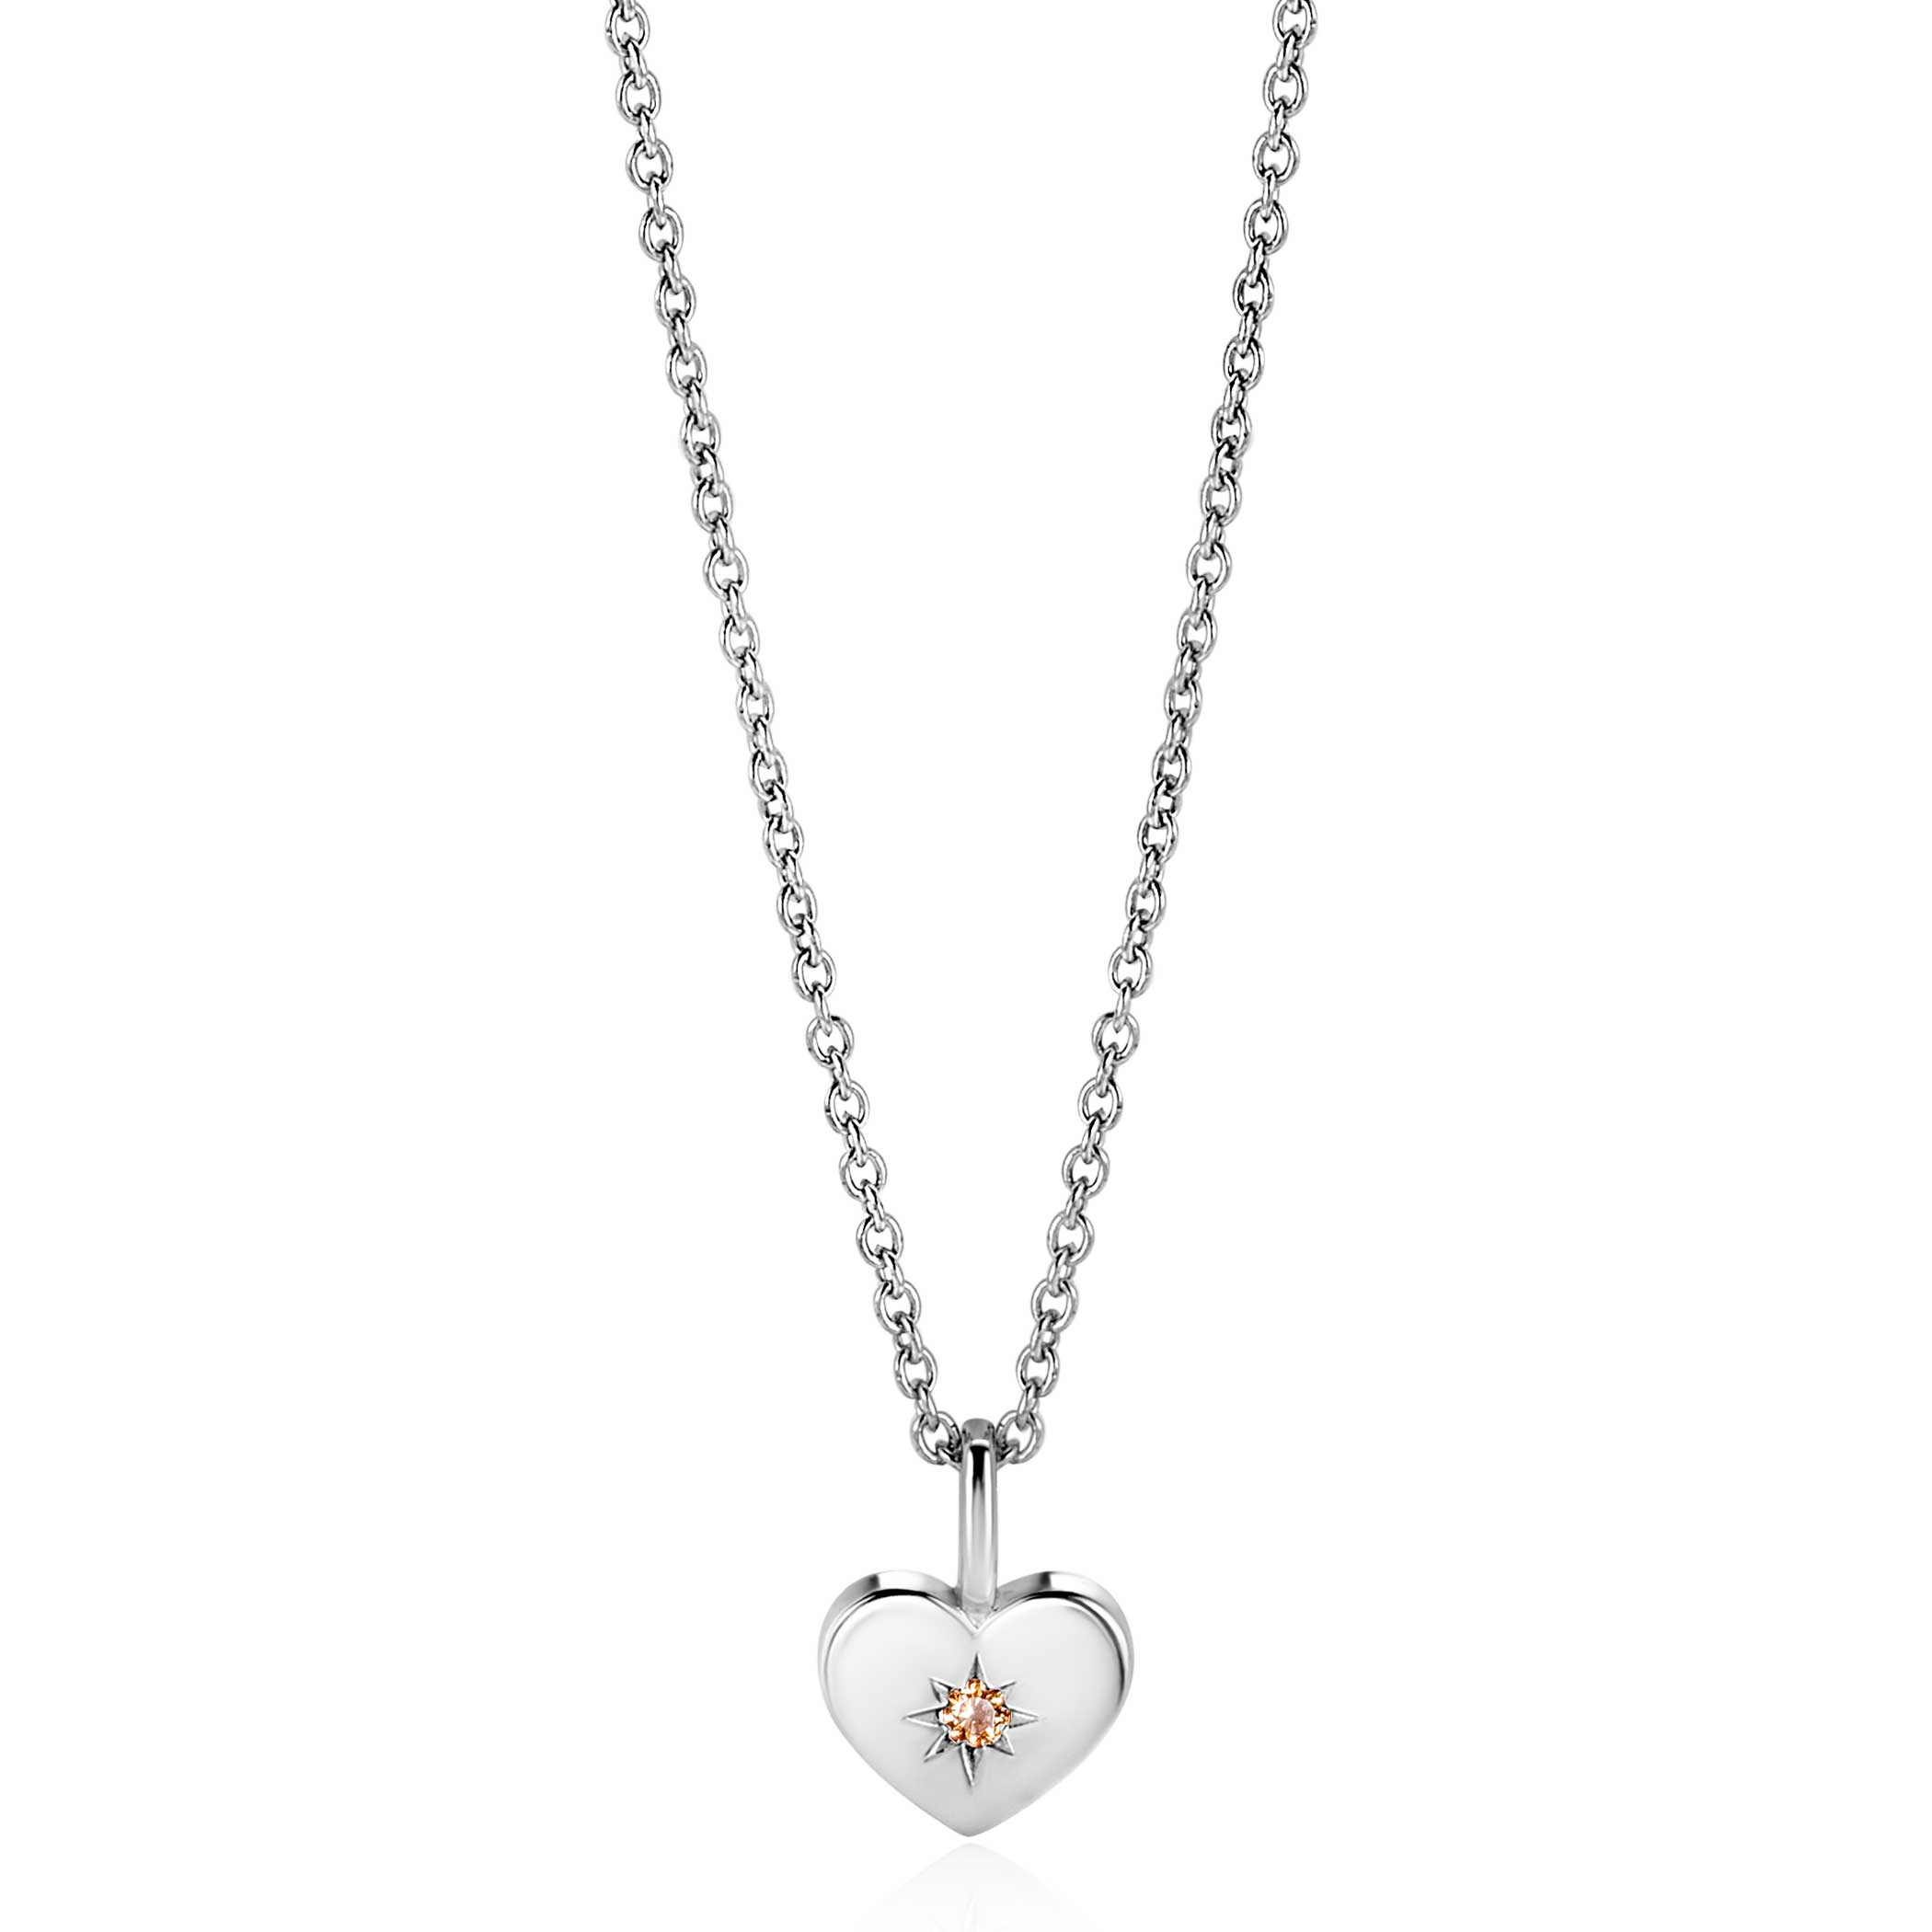 NOVEMBER Pendant 12mm Sterling Silver Heart Birthstone Champagne Citrine Zirconia (excl. necklace)